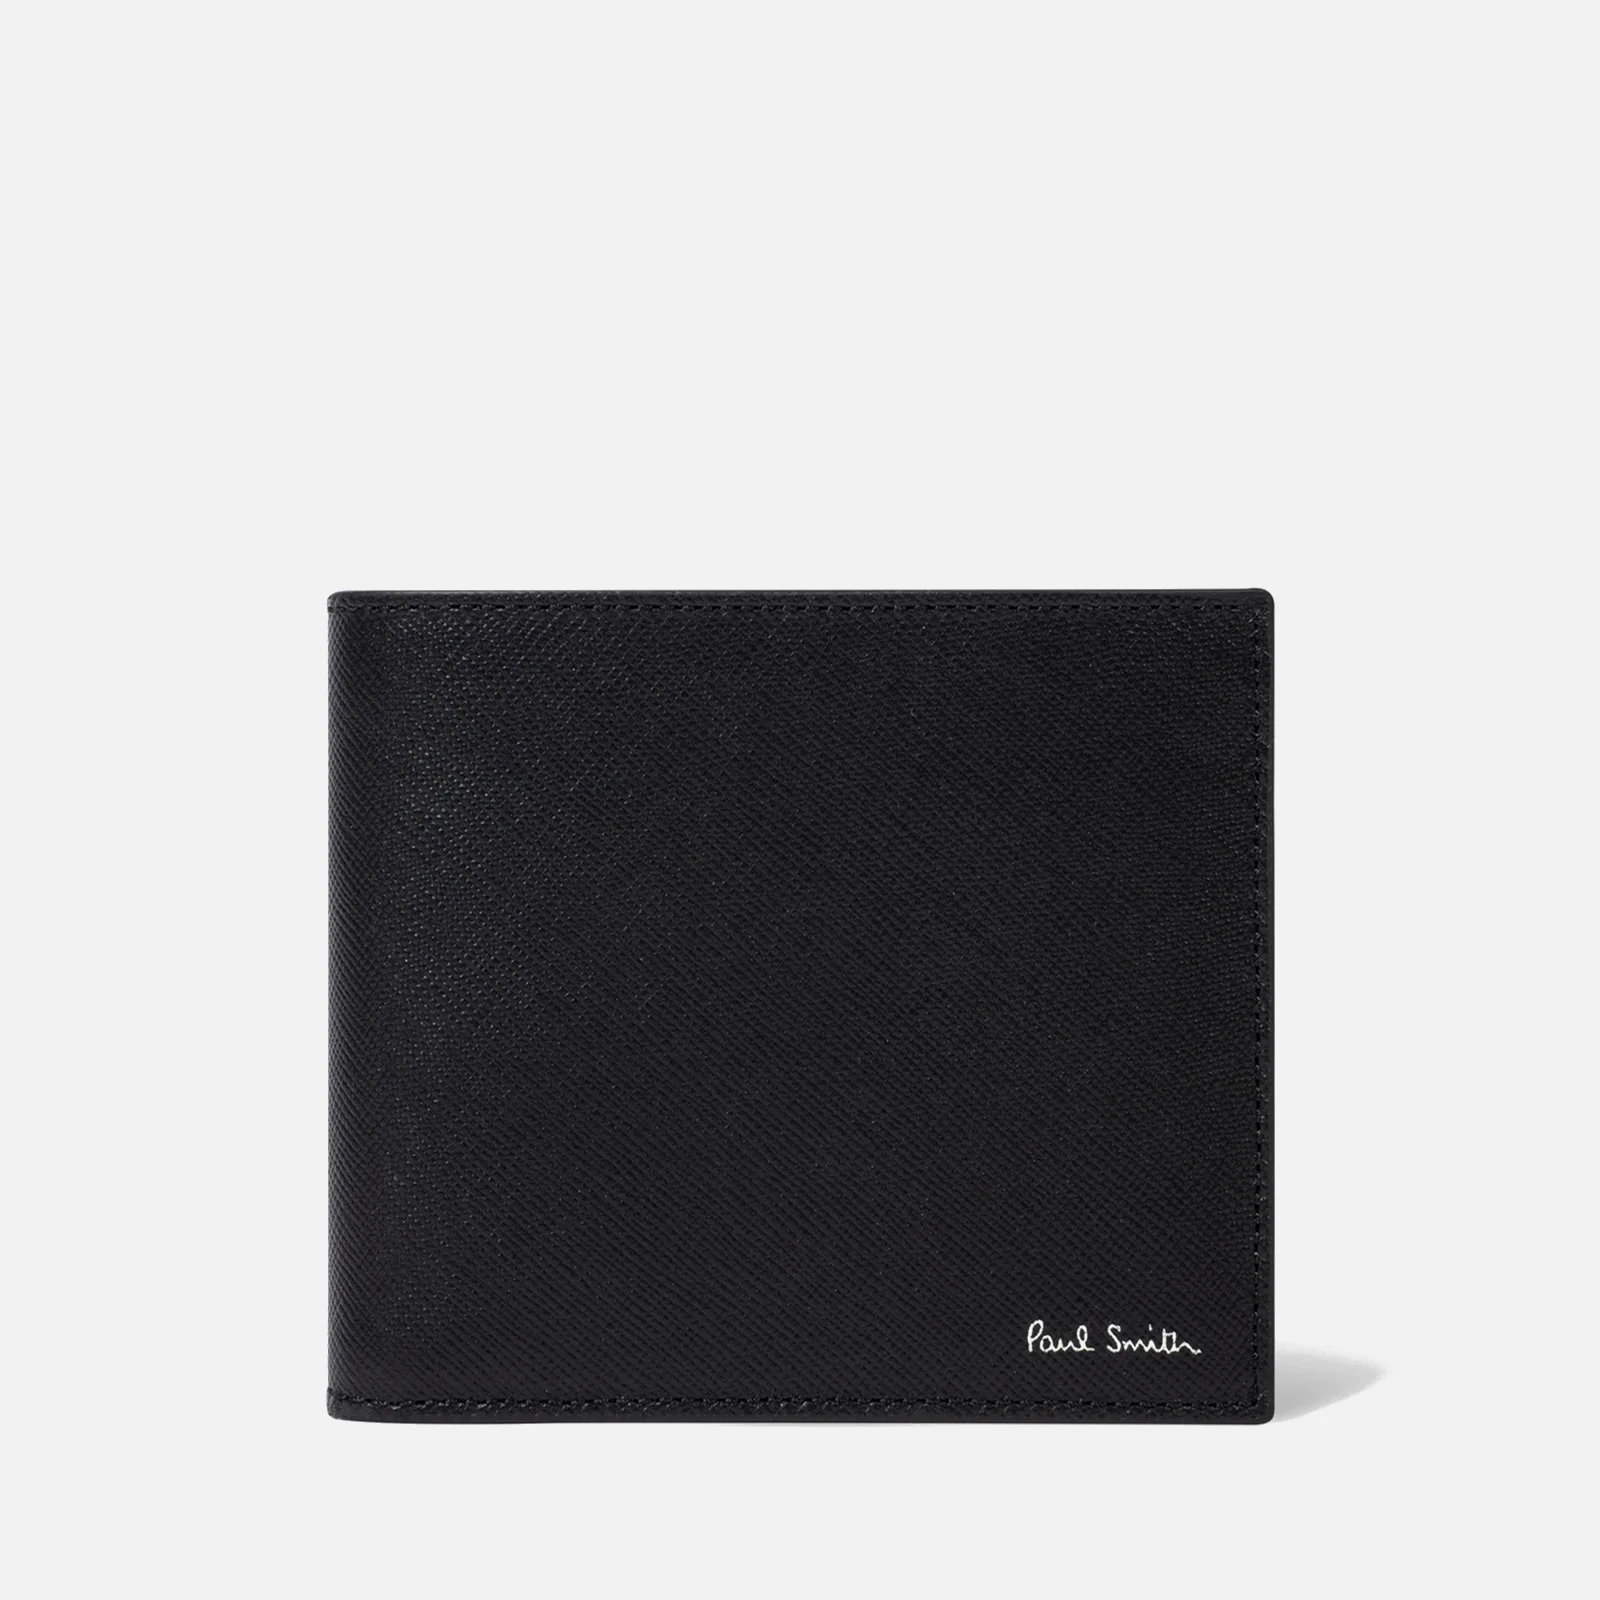 Paul Smith Leather Mini Card and Coin Wallet Image 1